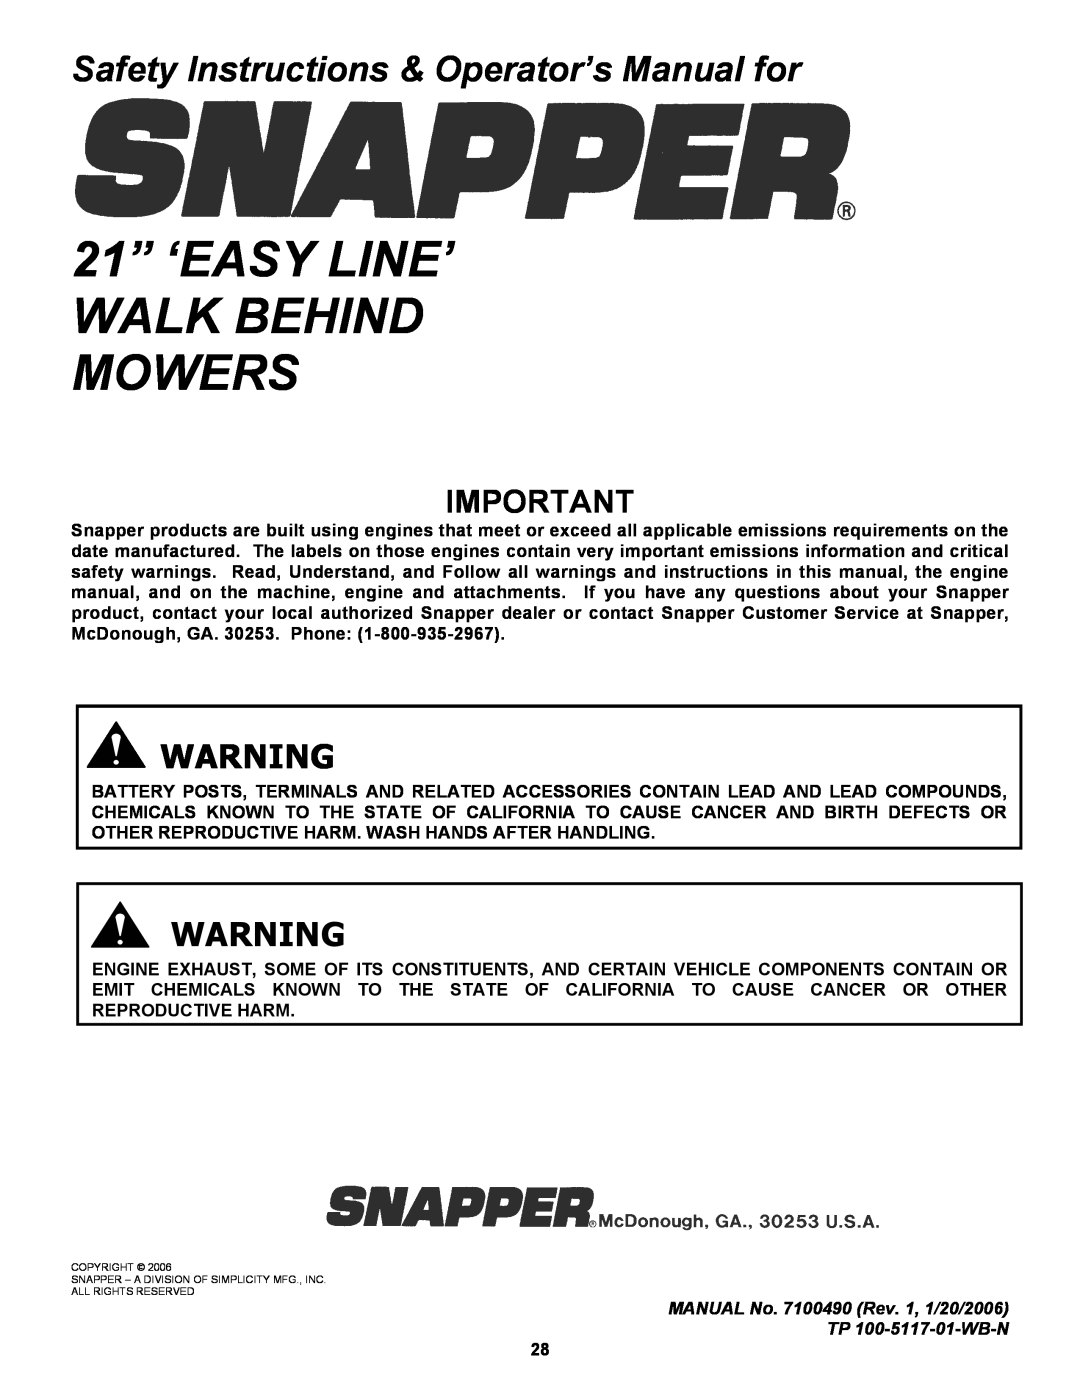 Snapper S21, SP21, SPV21, SPV21S, SPV21E 21” ‘EASY LINE’ WALK BEHIND MOWERS, Safety Instructions & Operator’s Manual for 